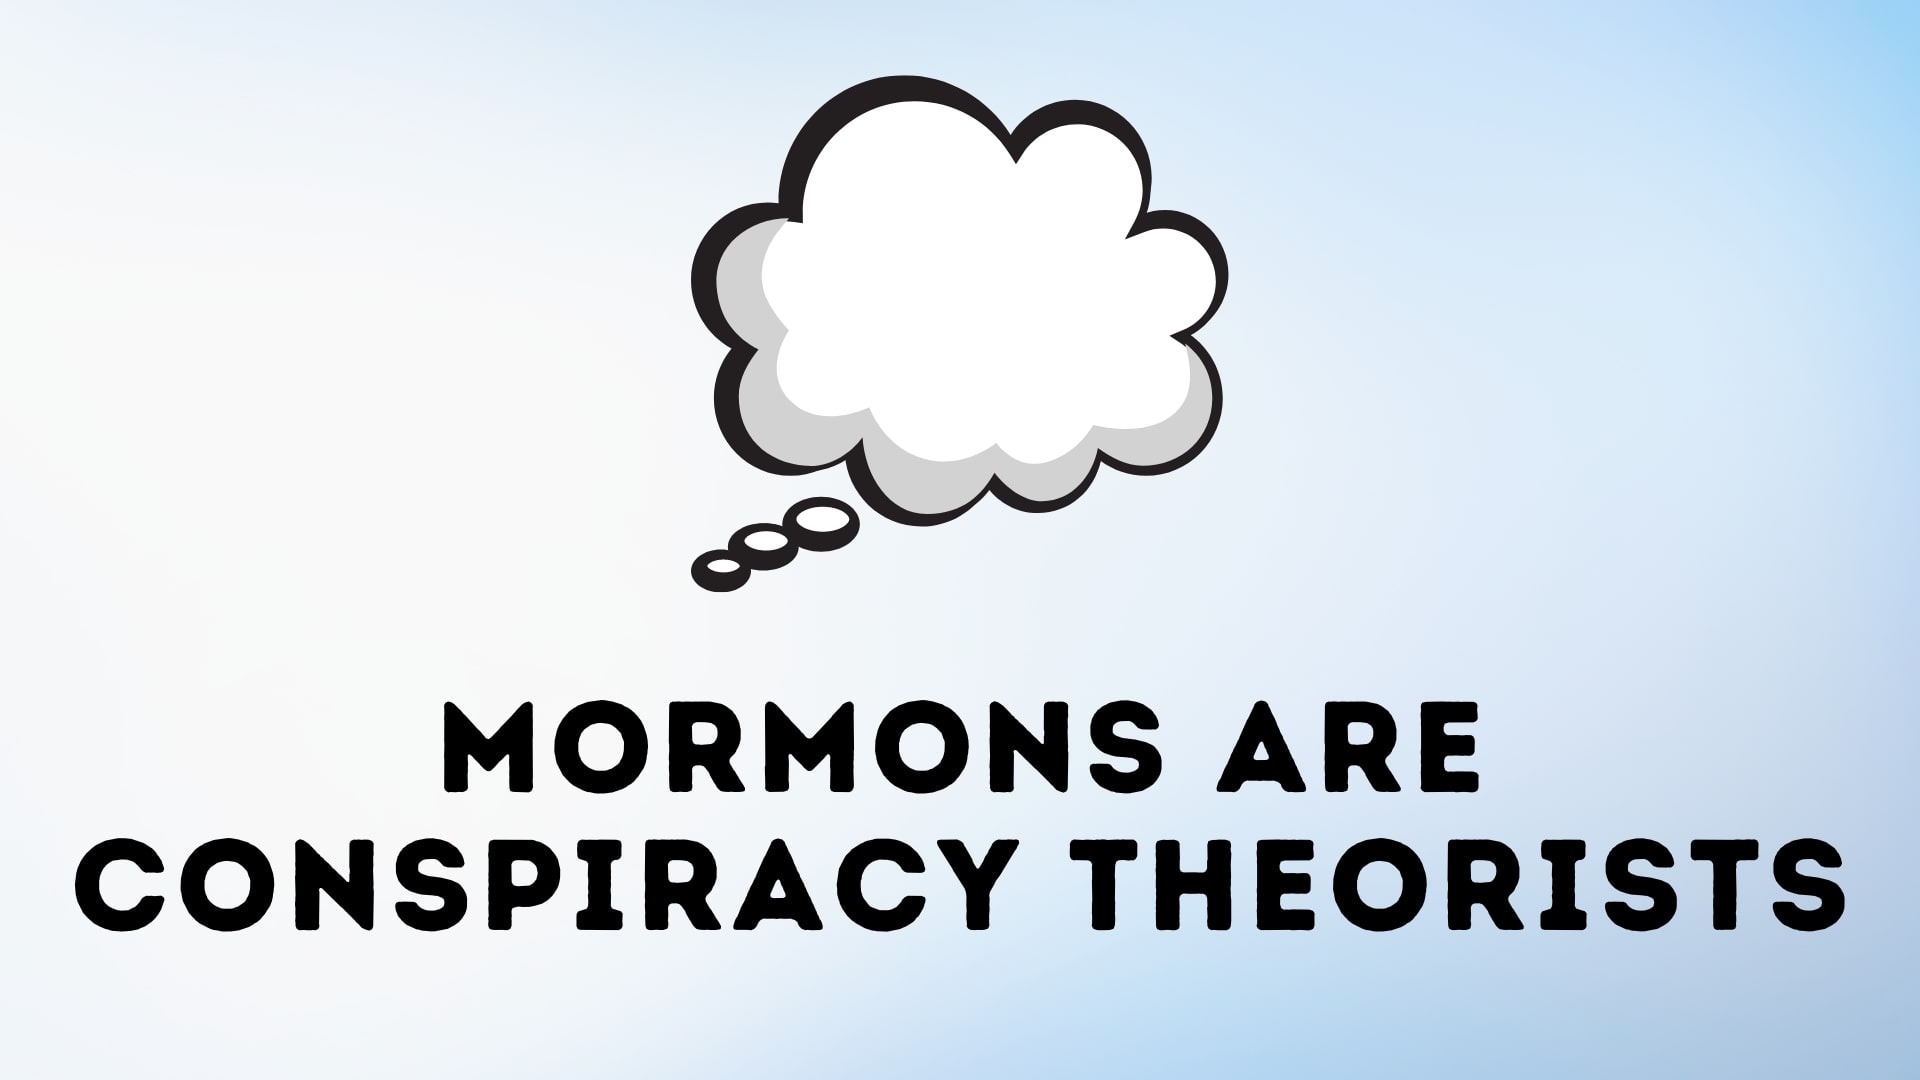 Mormons are Conspiracy Theorists